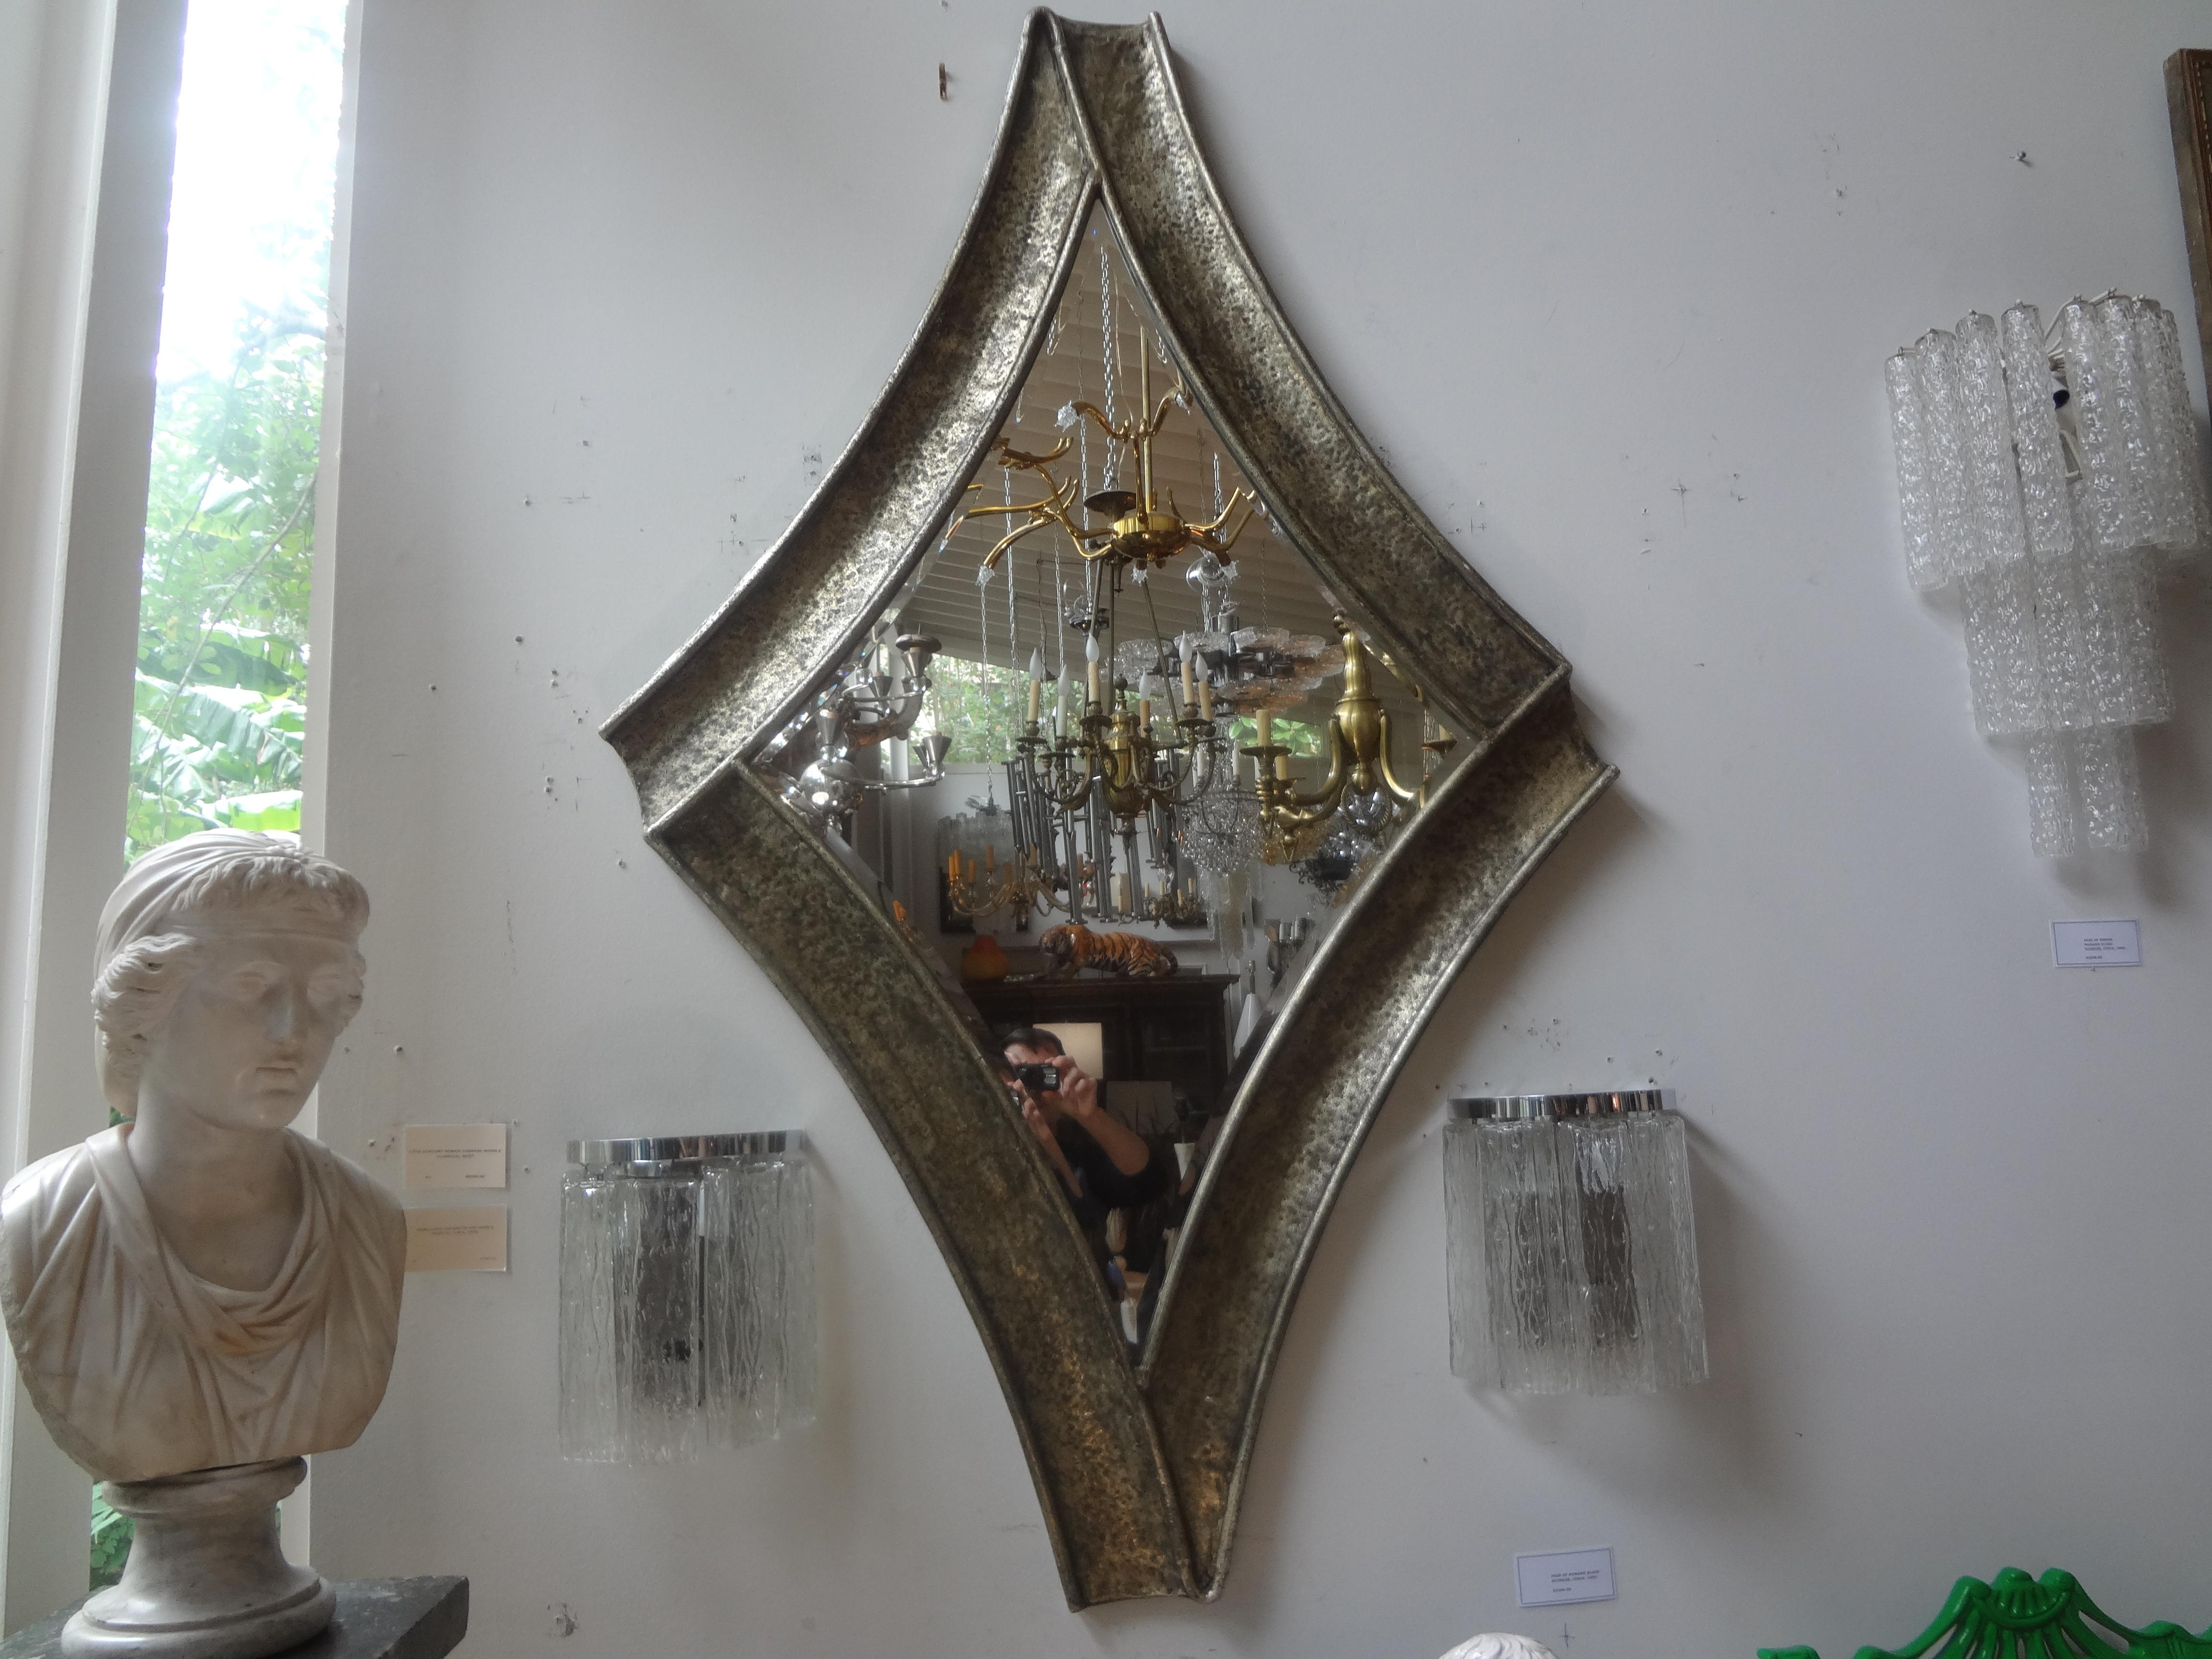 Midcentury brutalist hammered metal beveled mirror.
Unique large midcentury brutalist hammered metal beveled mirror. This versatile mirror would work well in a variety of interiors.